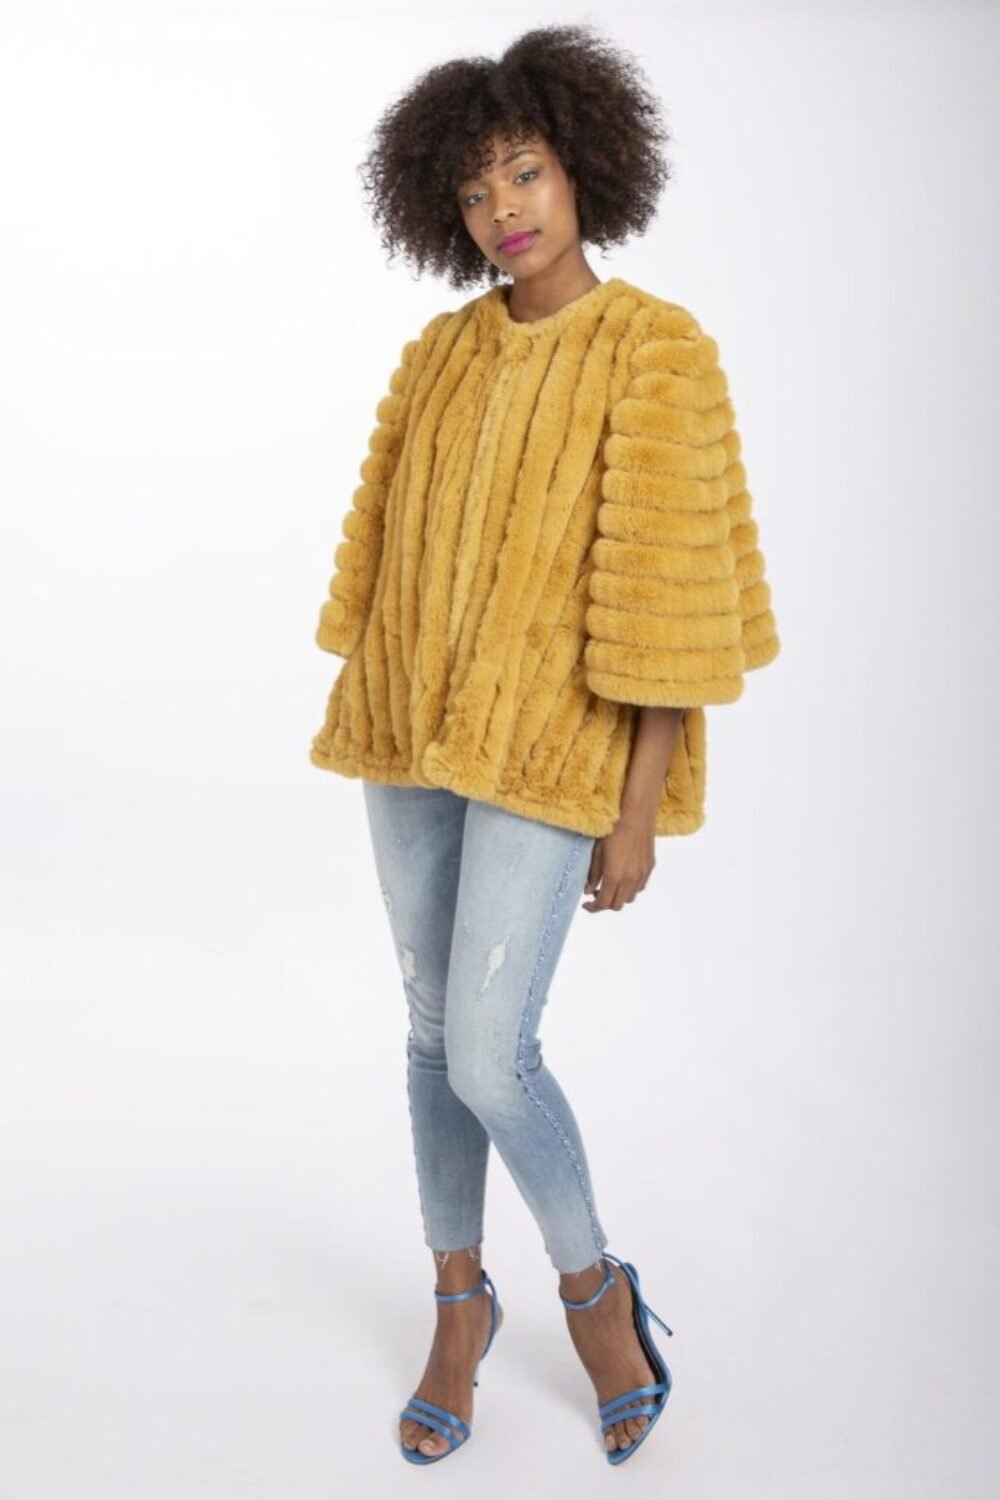 Shop Lux Yellow Faux Fur Striped Coat and women's luxury and designer clothes at www.lux-apparel.co.uk